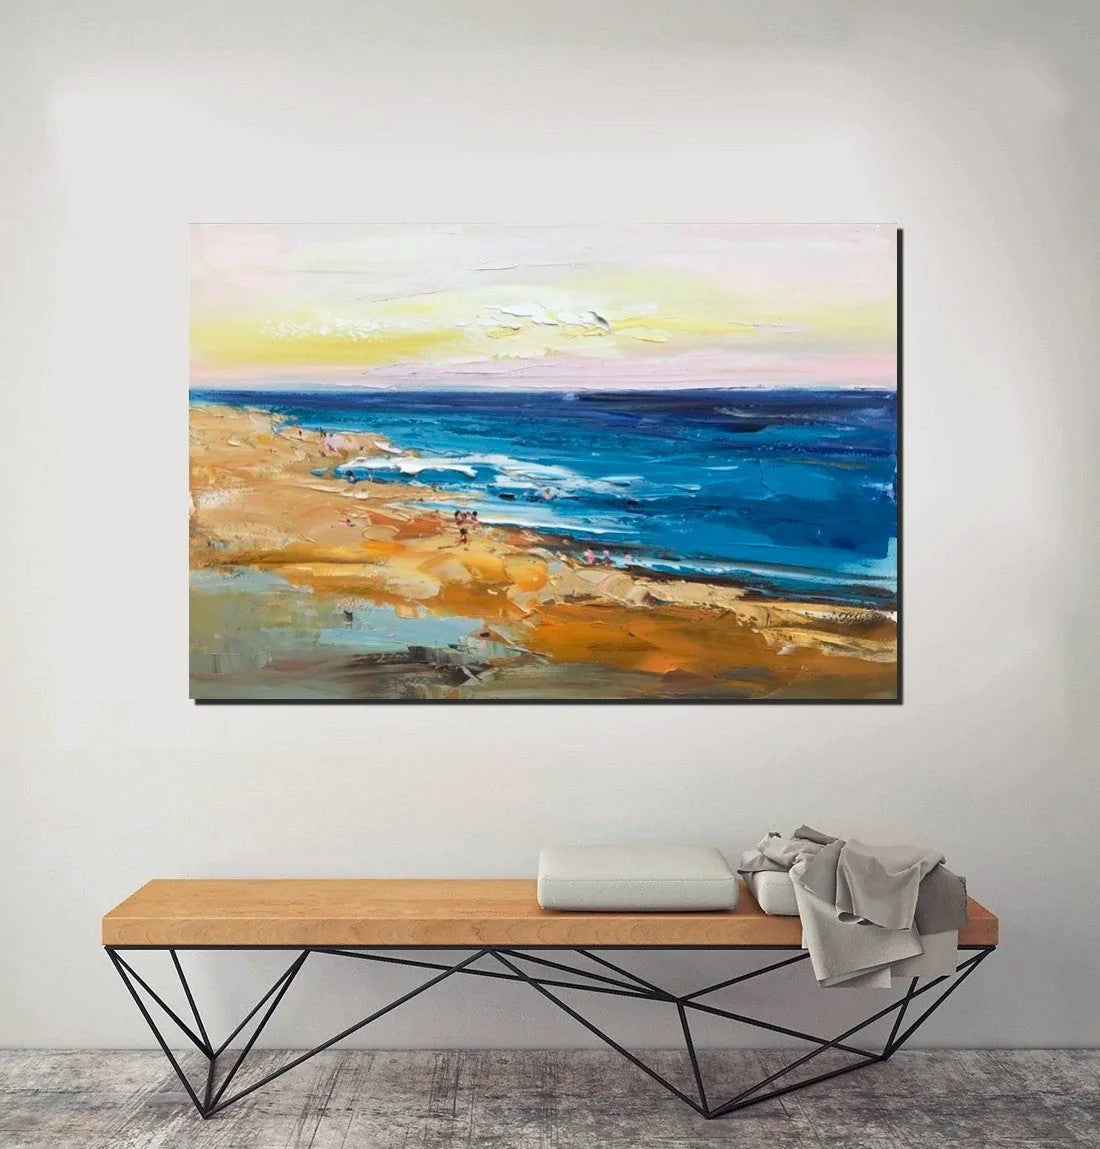 Large Paintings Behind Sofa, Landscape Painting for Living Room, Acrylic Paintings on Canvas, Heavy Texture Painting, Seashore Beach Painting